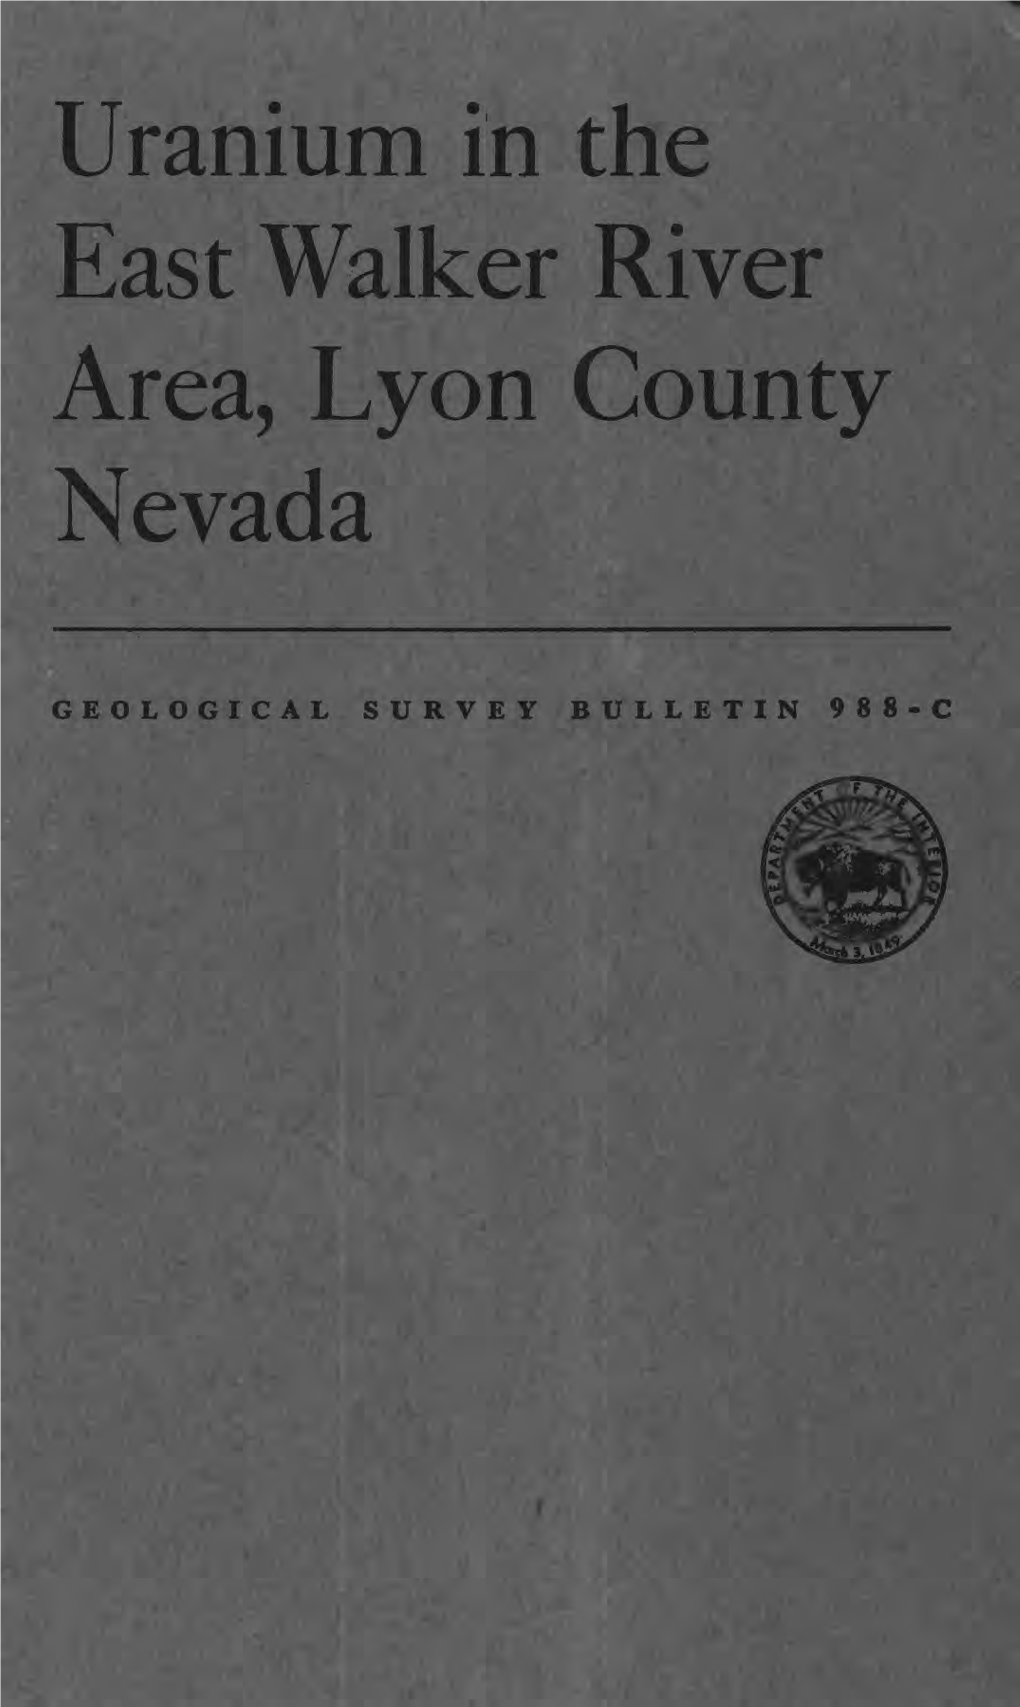 Uranium in the East Walker River Area, Lyon County Nevada